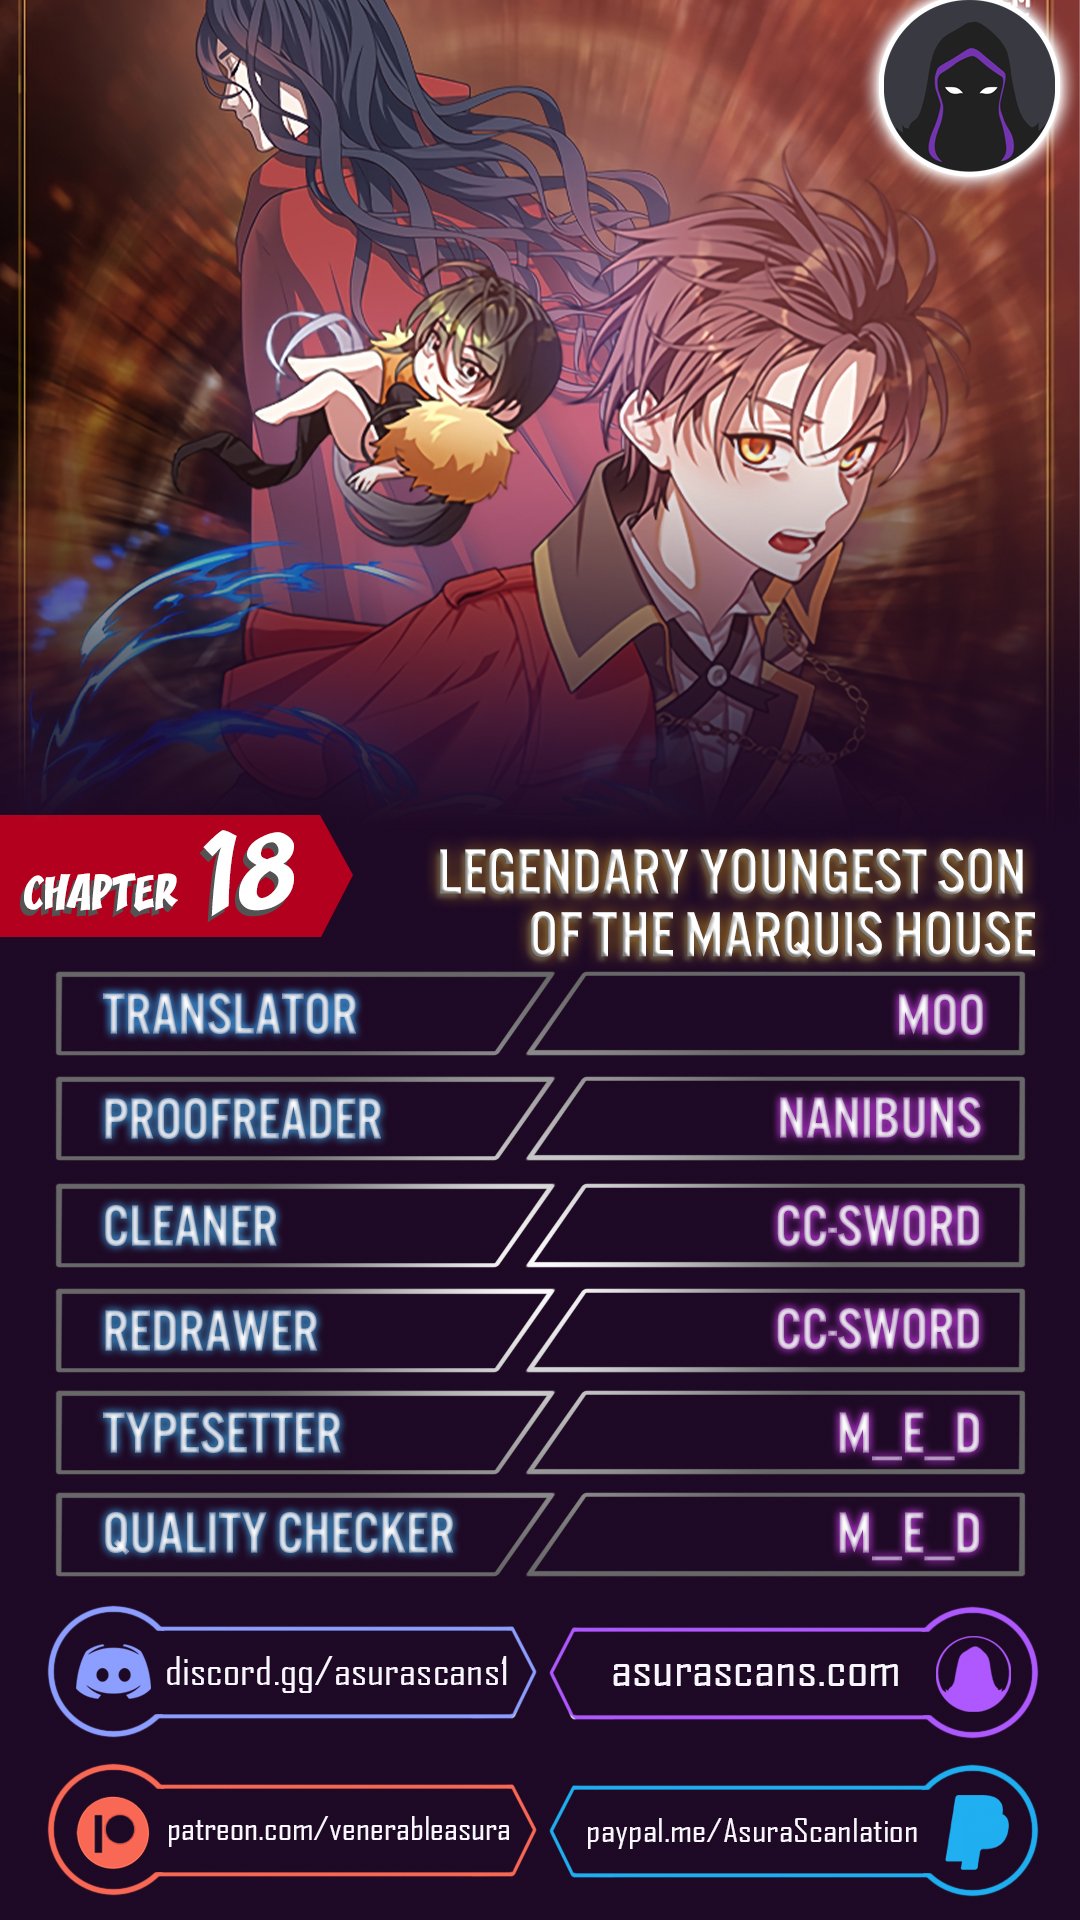 Legendary Youngest Son of the Marquis House - Chapter 18870 - Image 1